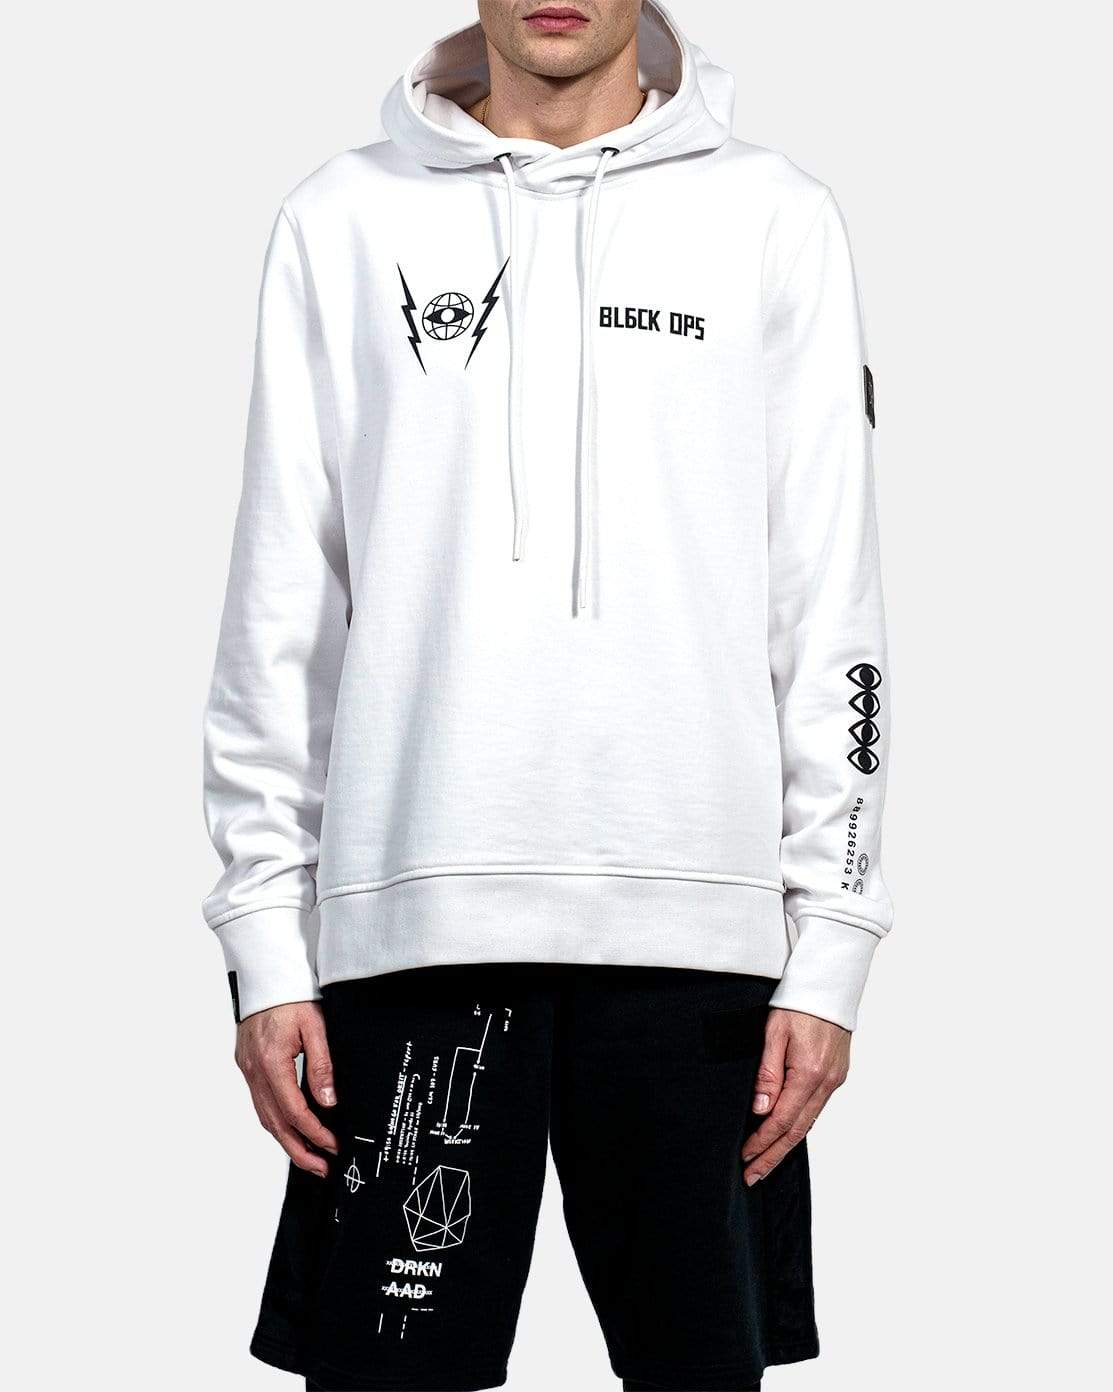 White hoodie with discreet prints. Inspired from the game Black Ops.